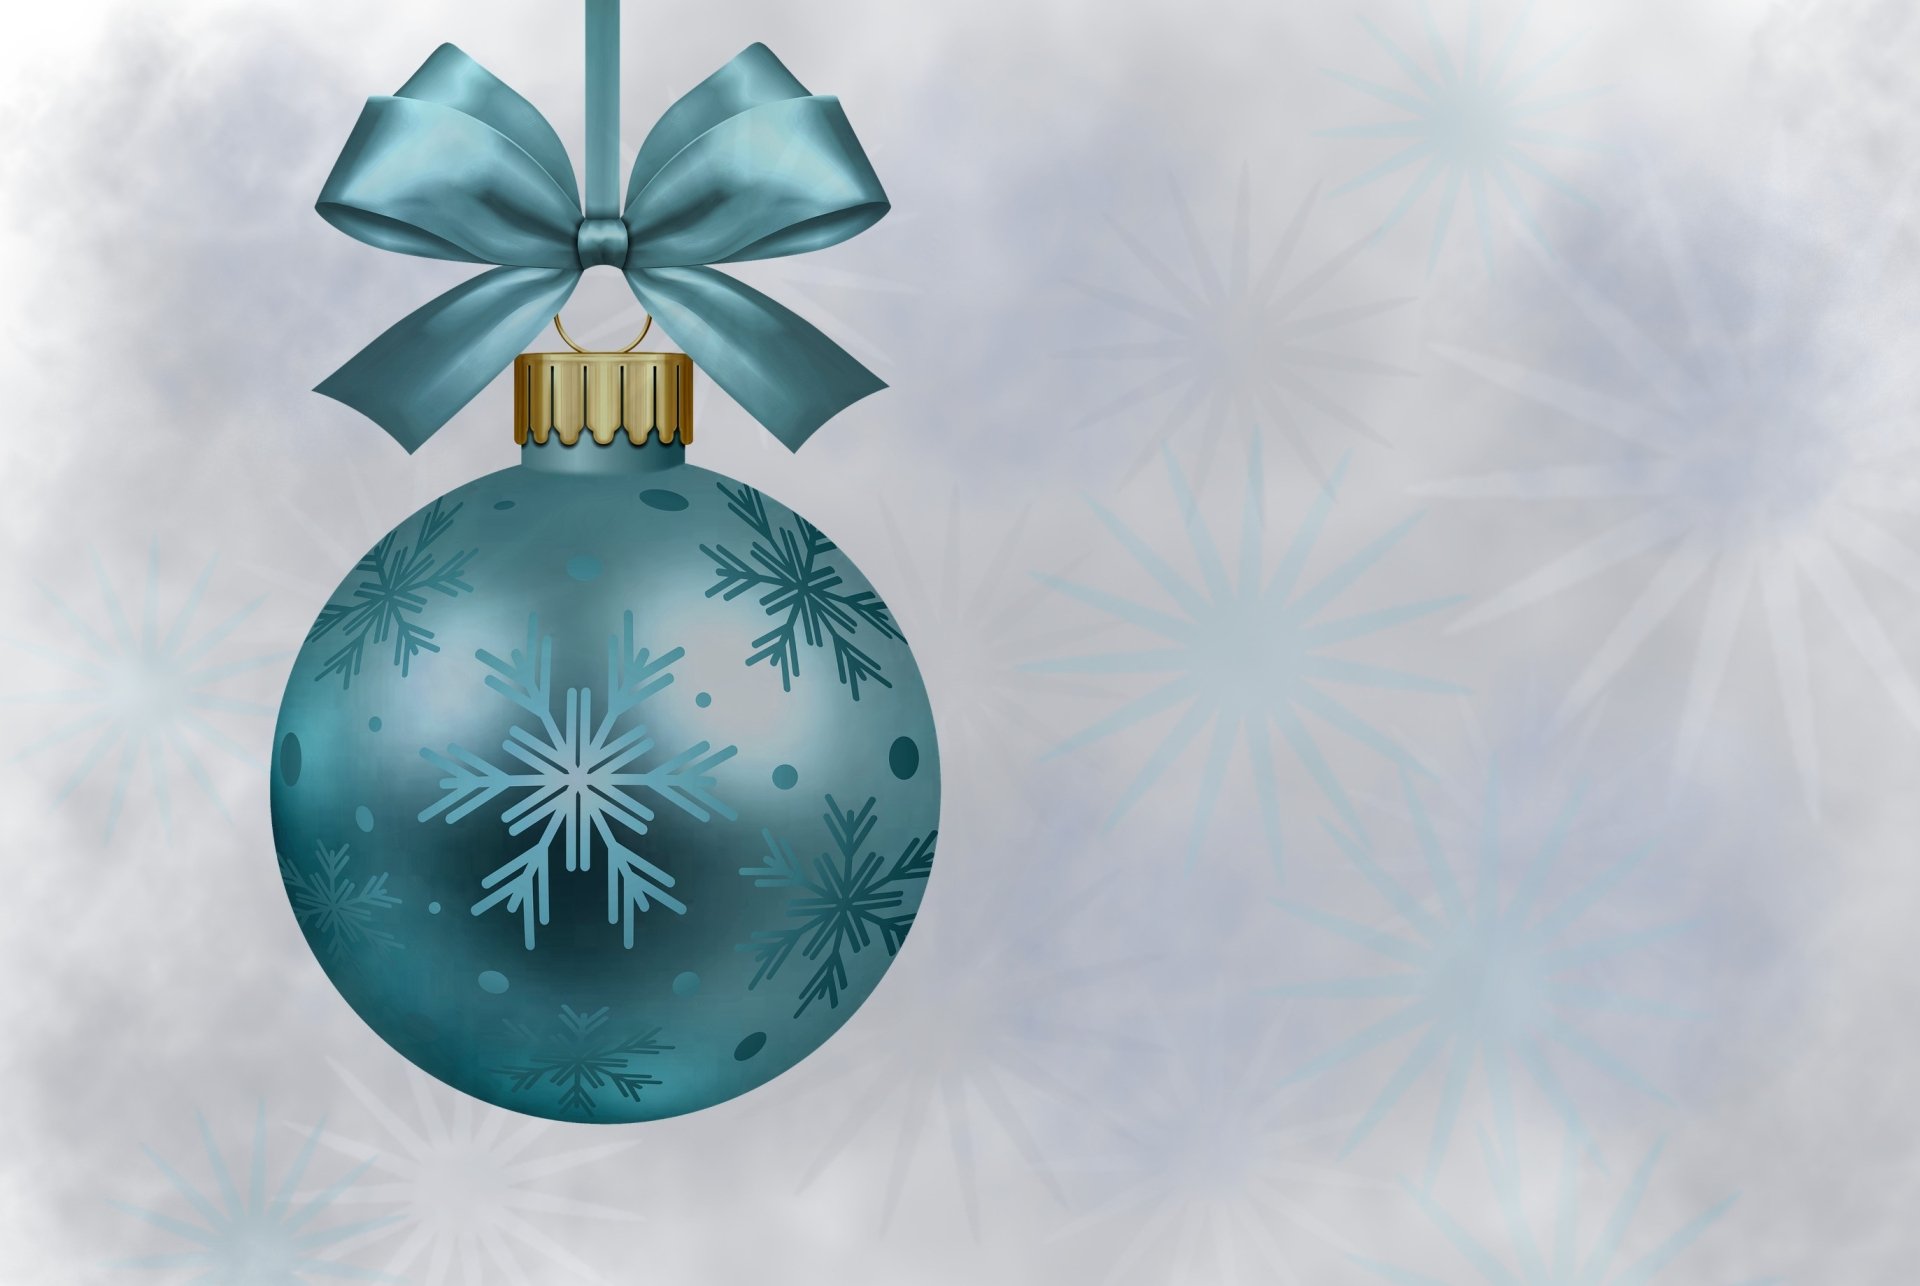 Blue Christmas Bauble by Marisa04